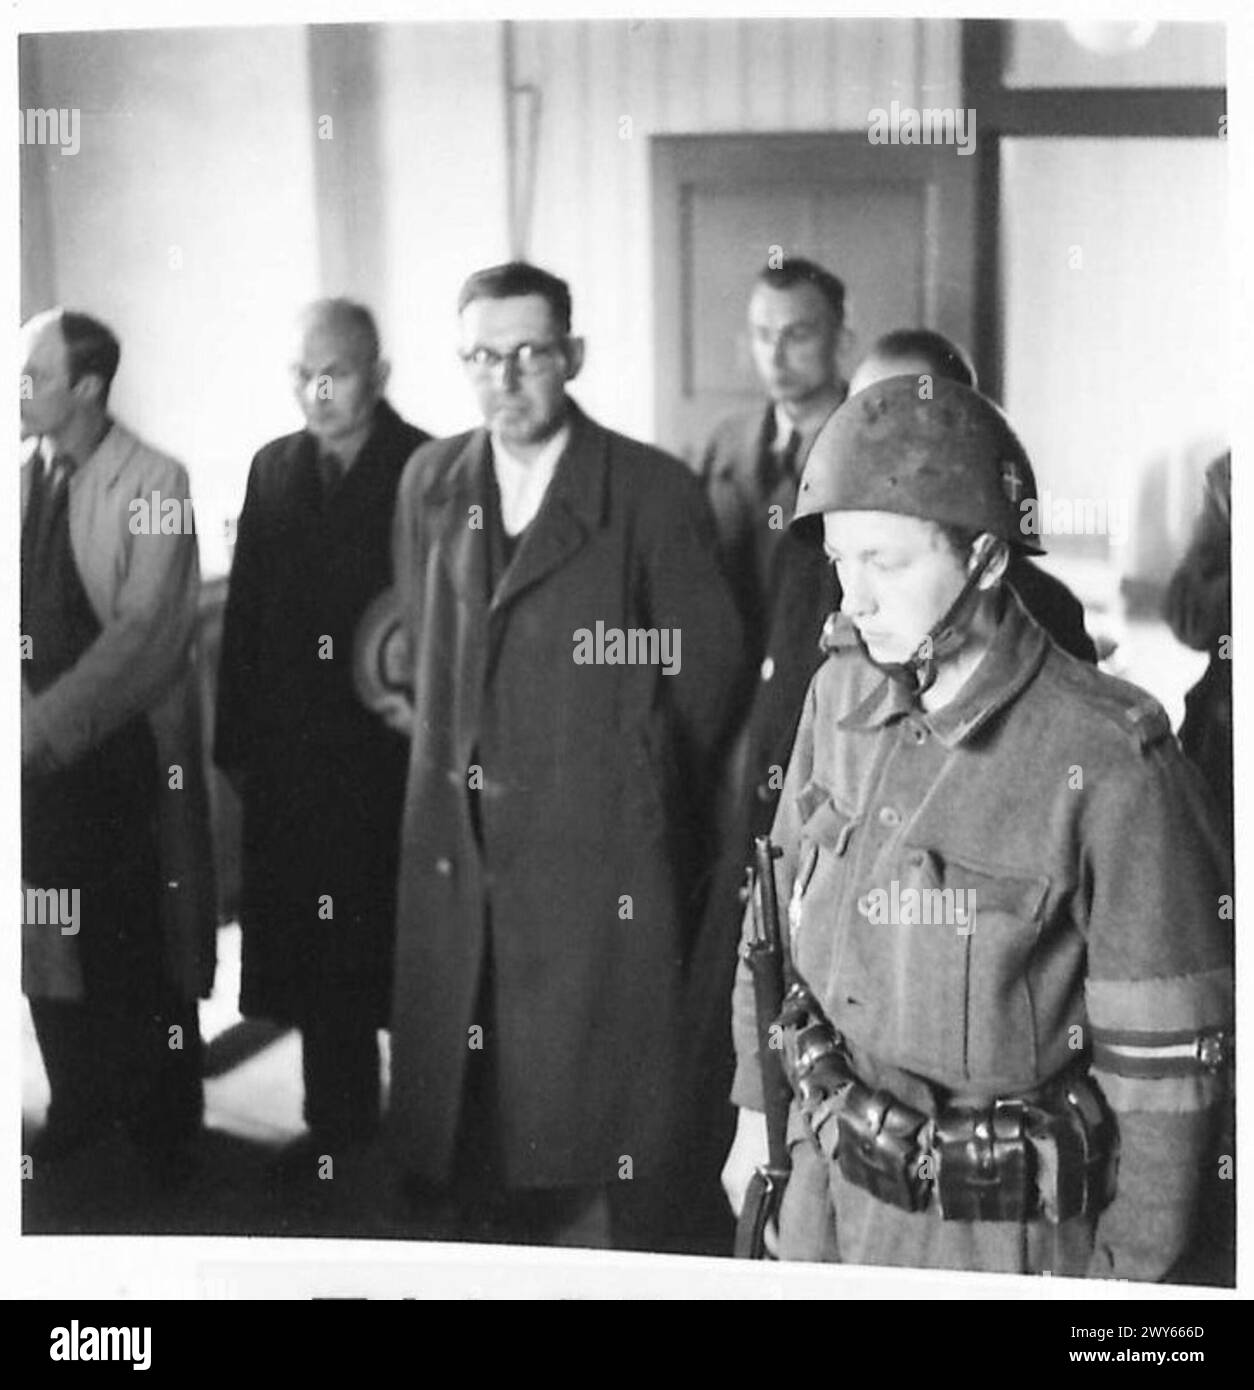 THE GREAT ROUND-UP - Captured Gestapo Agents are lined up inside the Interrogation Room - a Danish soldier stands guard. , British Army, 21st Army Group Stock Photo